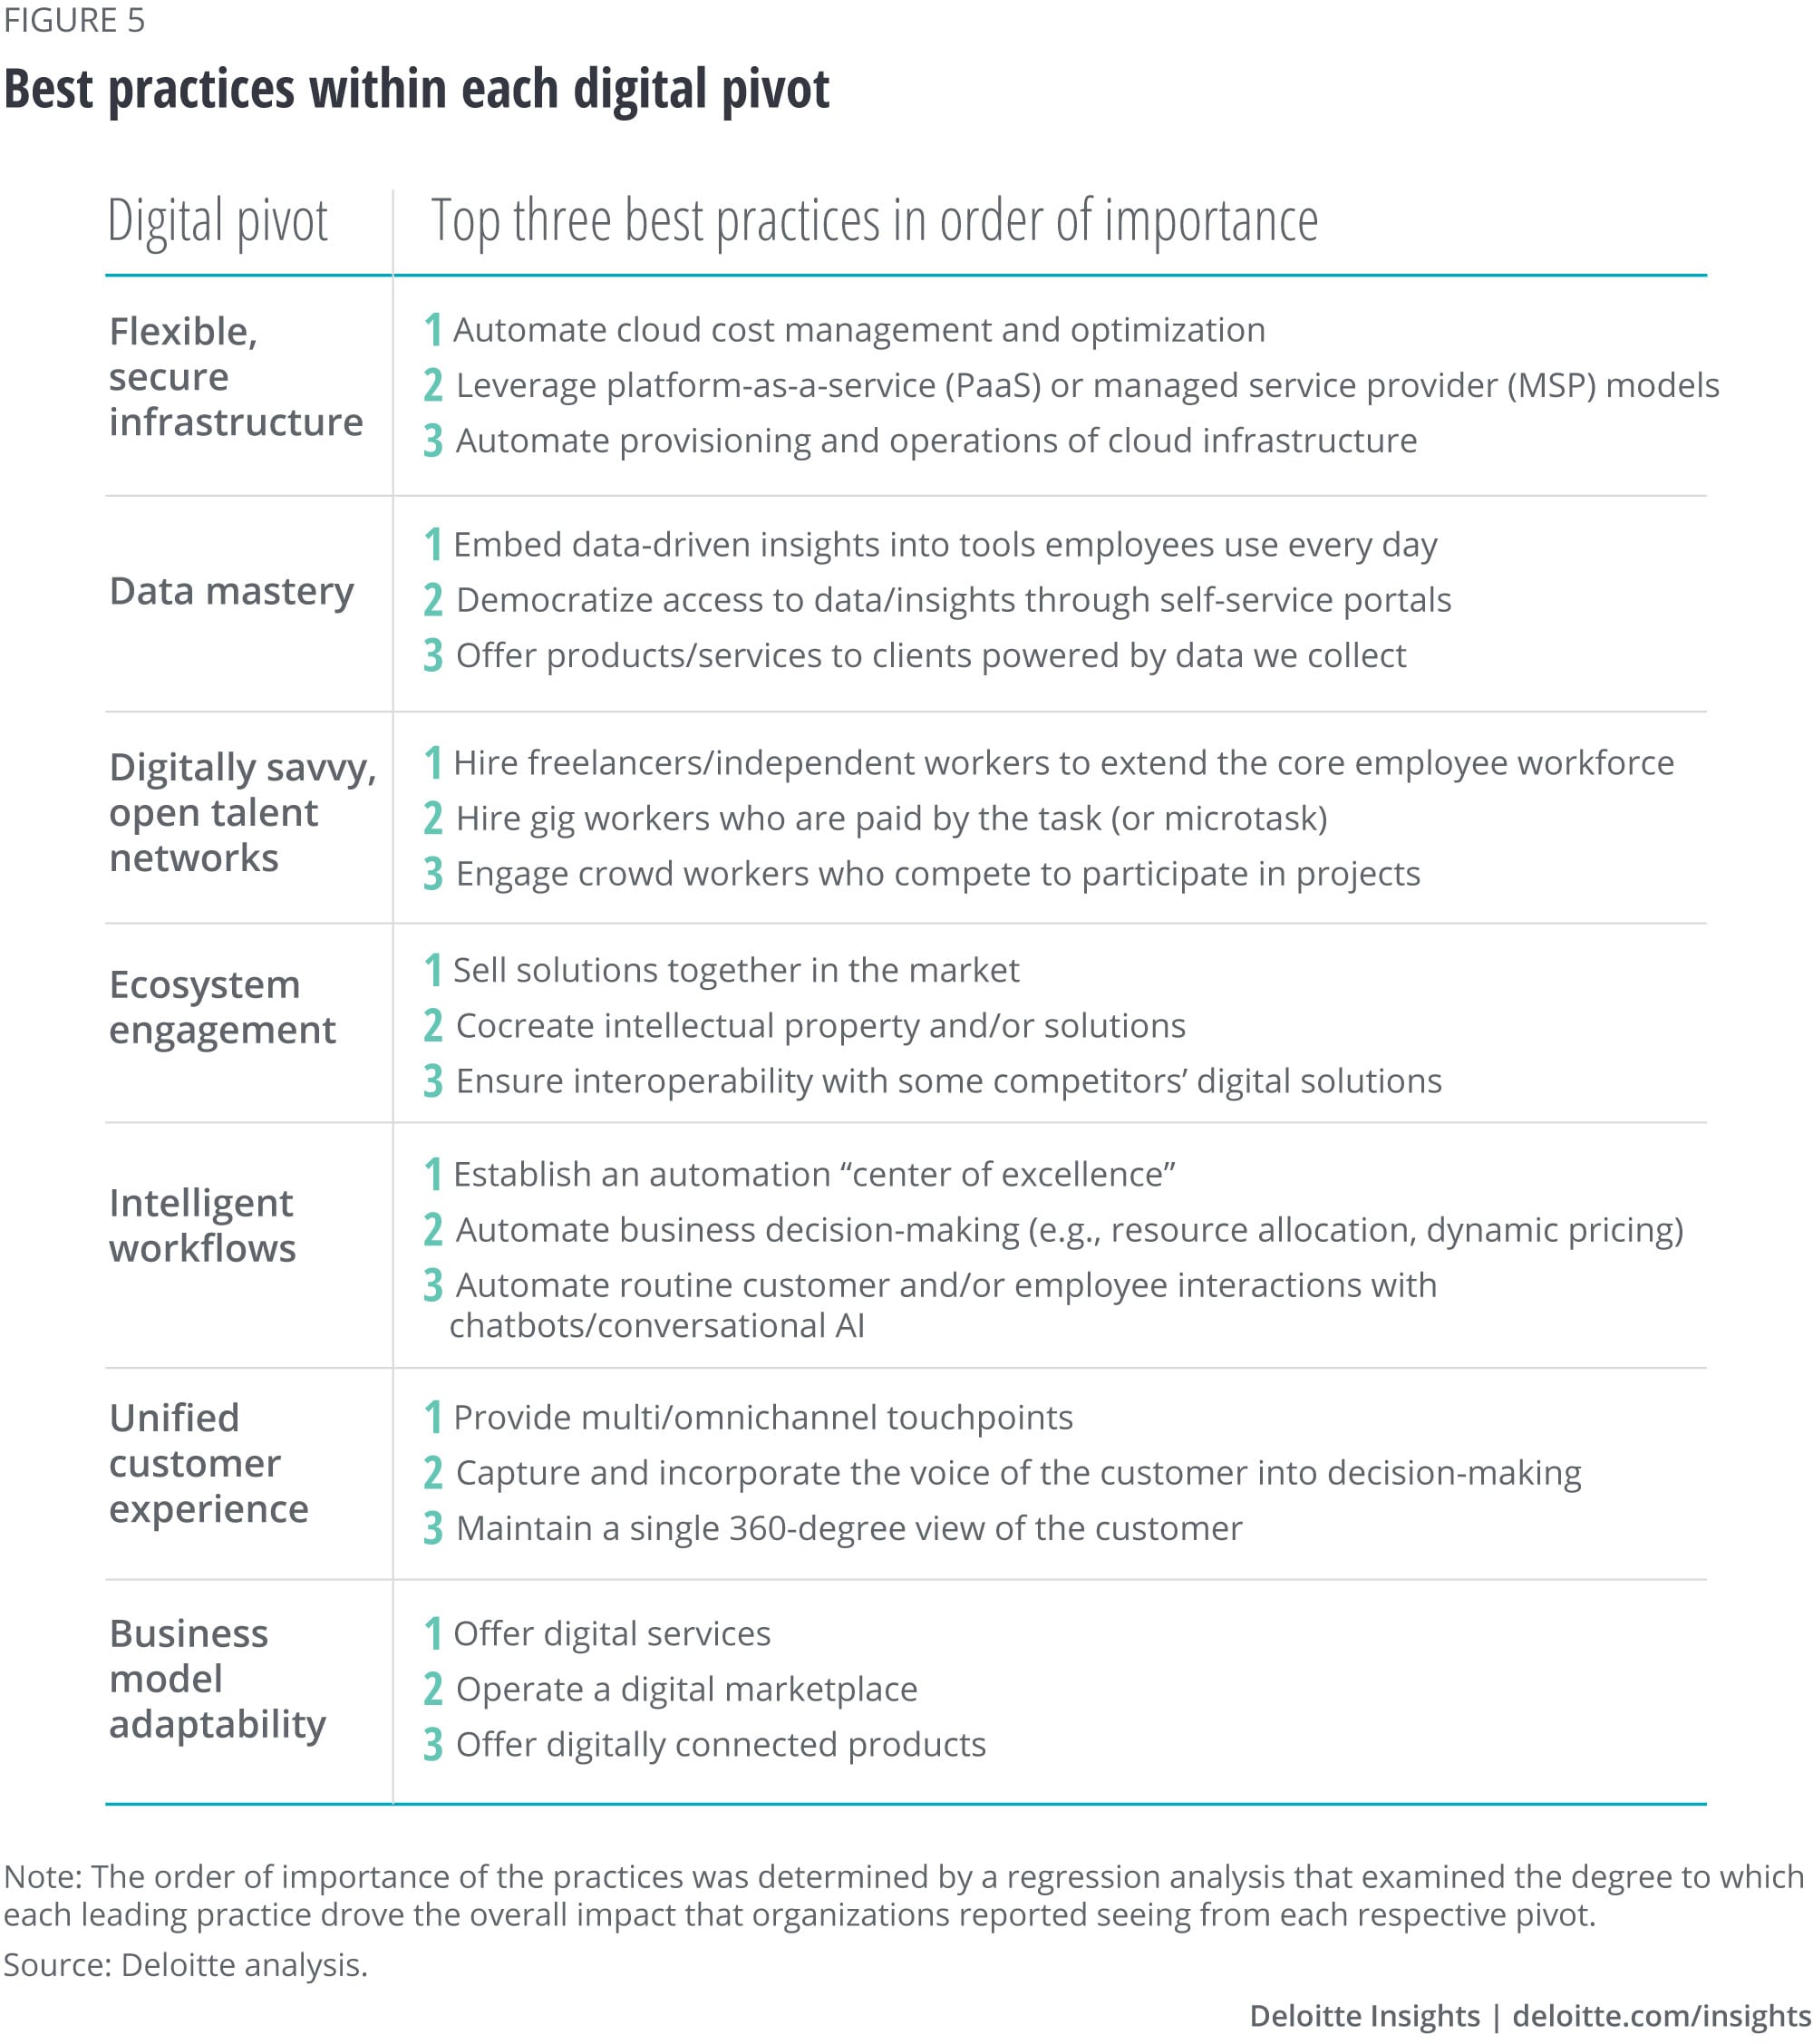 Leading practices within each digital pivot